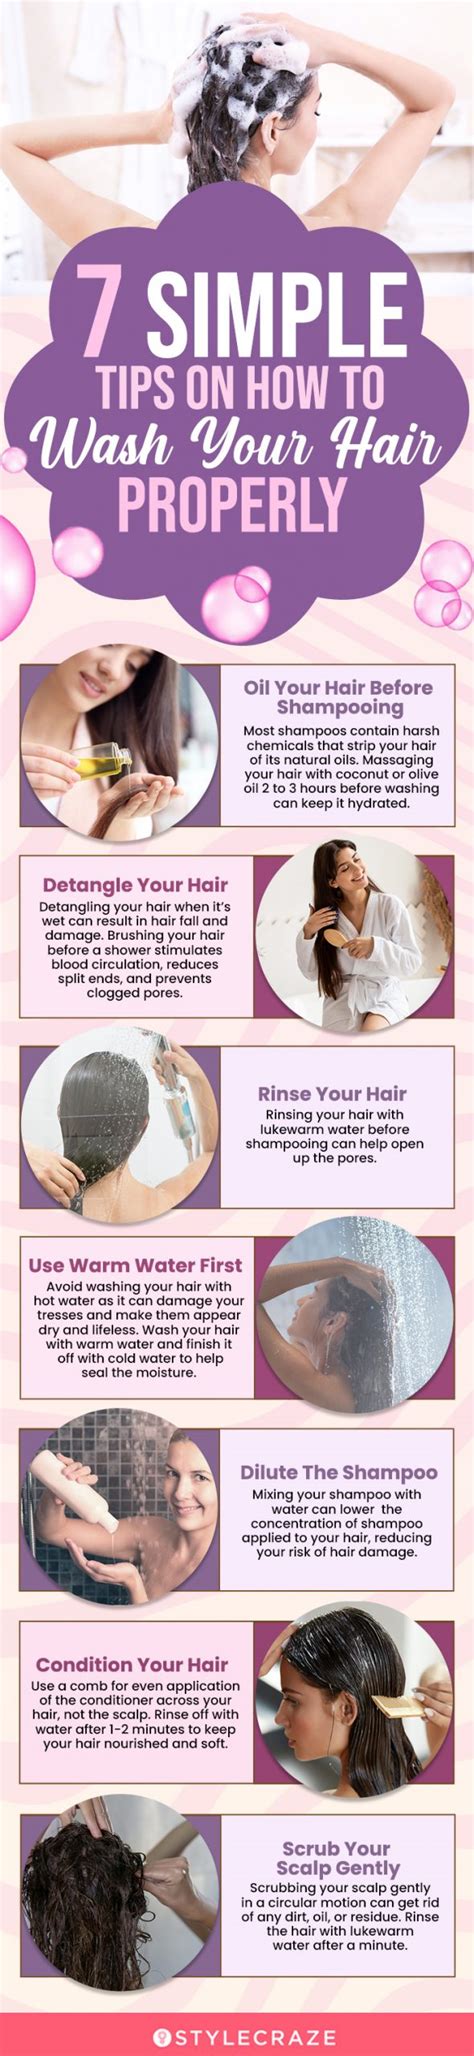 Top Image How To Properly Wash Your Hair Thptnganamst Edu Vn